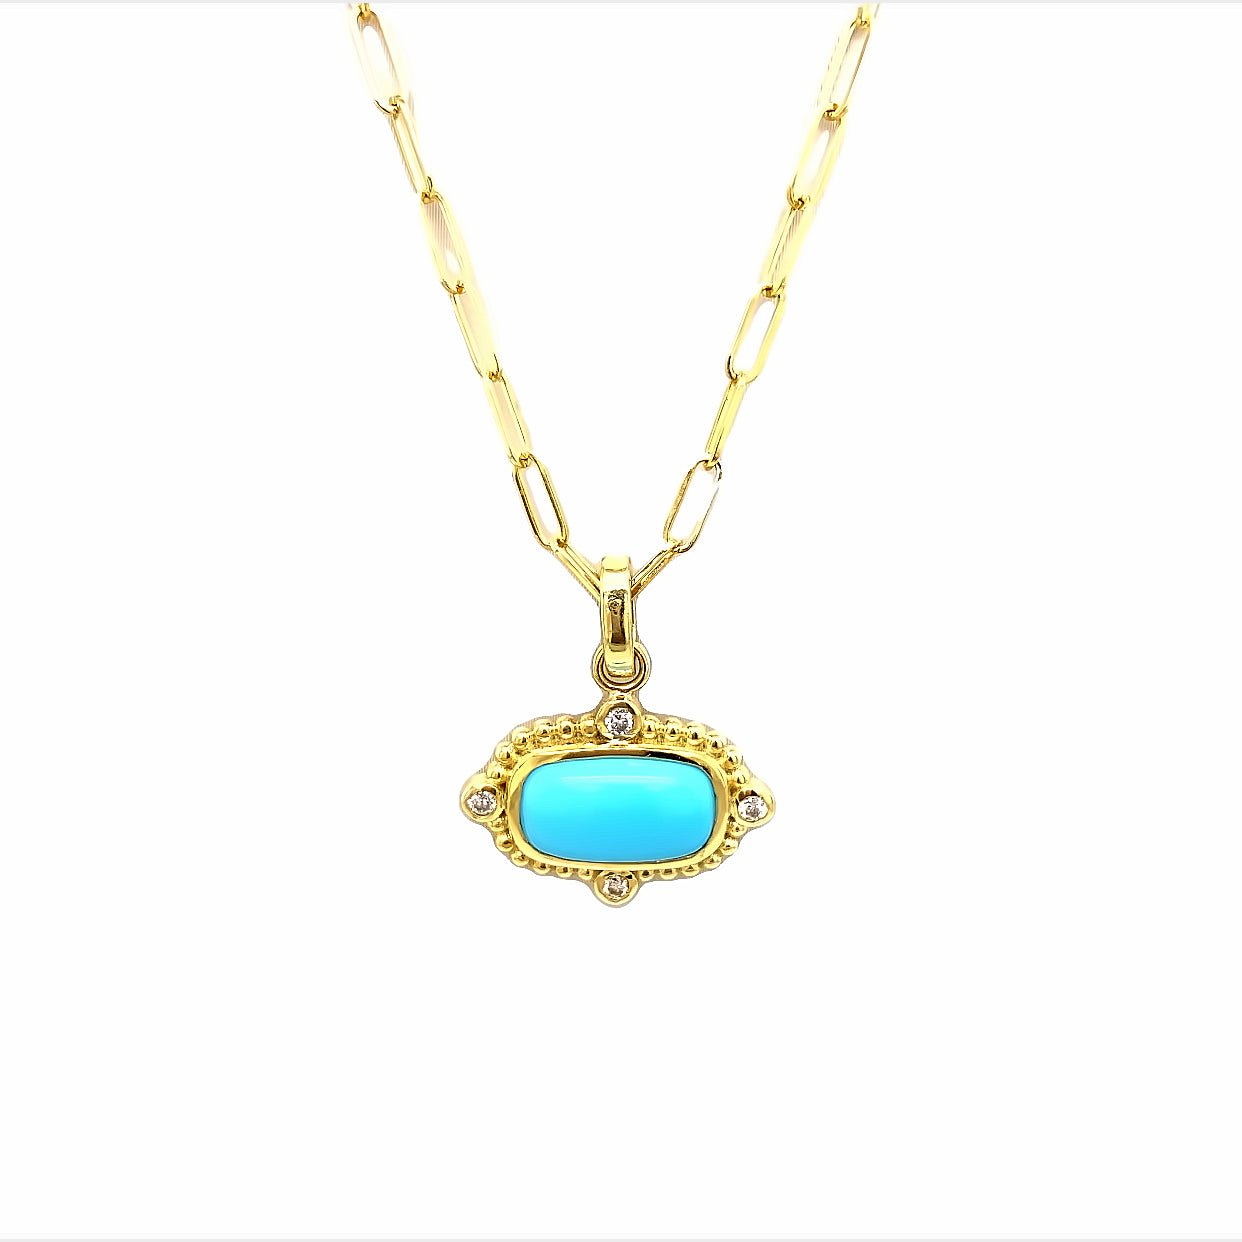 Necklace - 14k yg Pendant turquoise diamond paperclip 18" drop - Gaines Jewelers